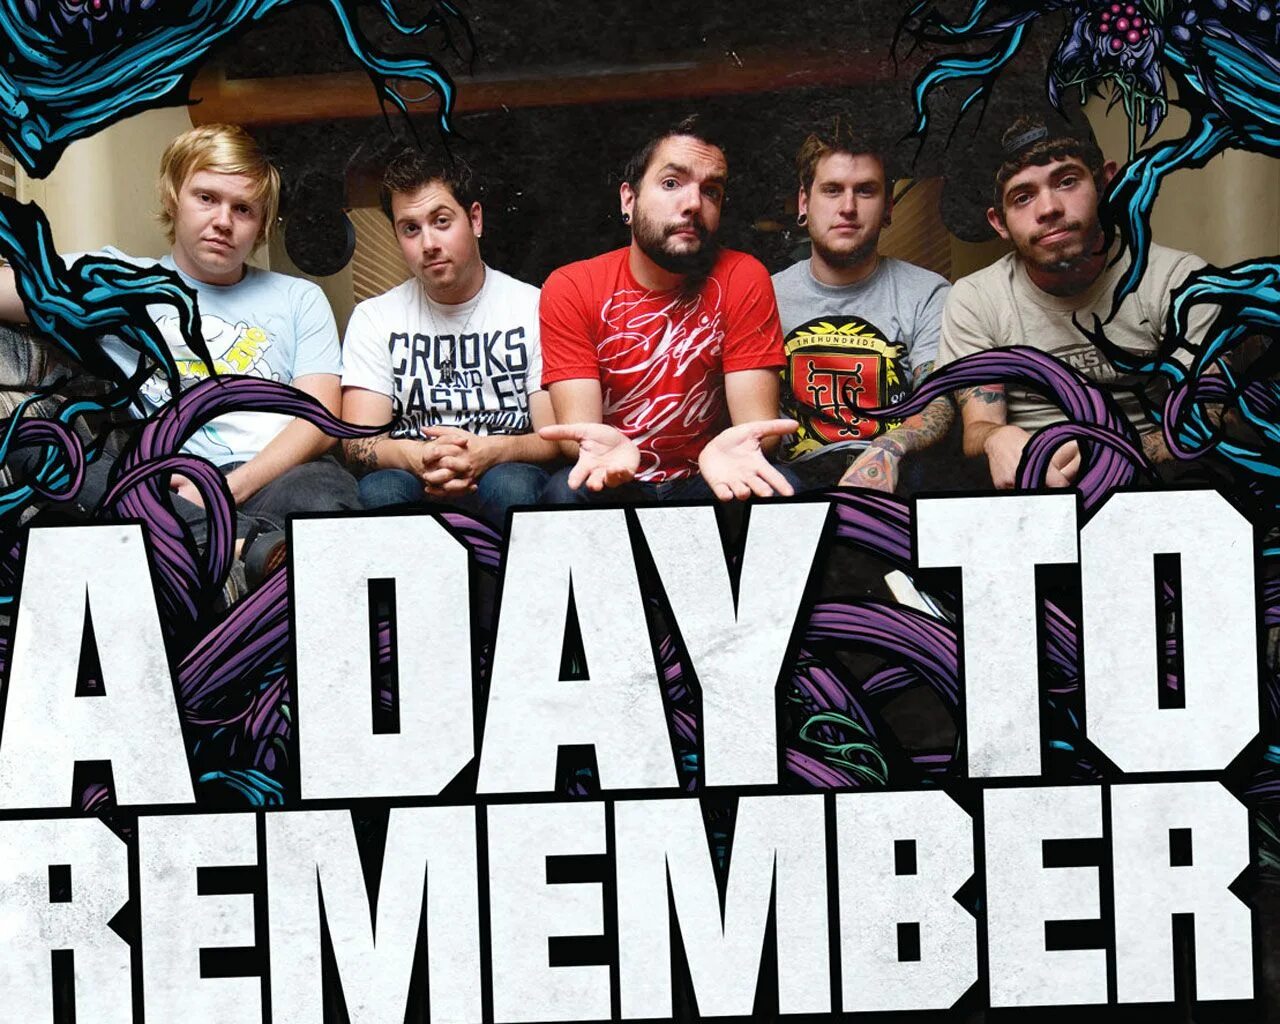 A year to remember. A Day to remember. Remember группа. A Day to remember 2021. Плакат группы a Day to remember.